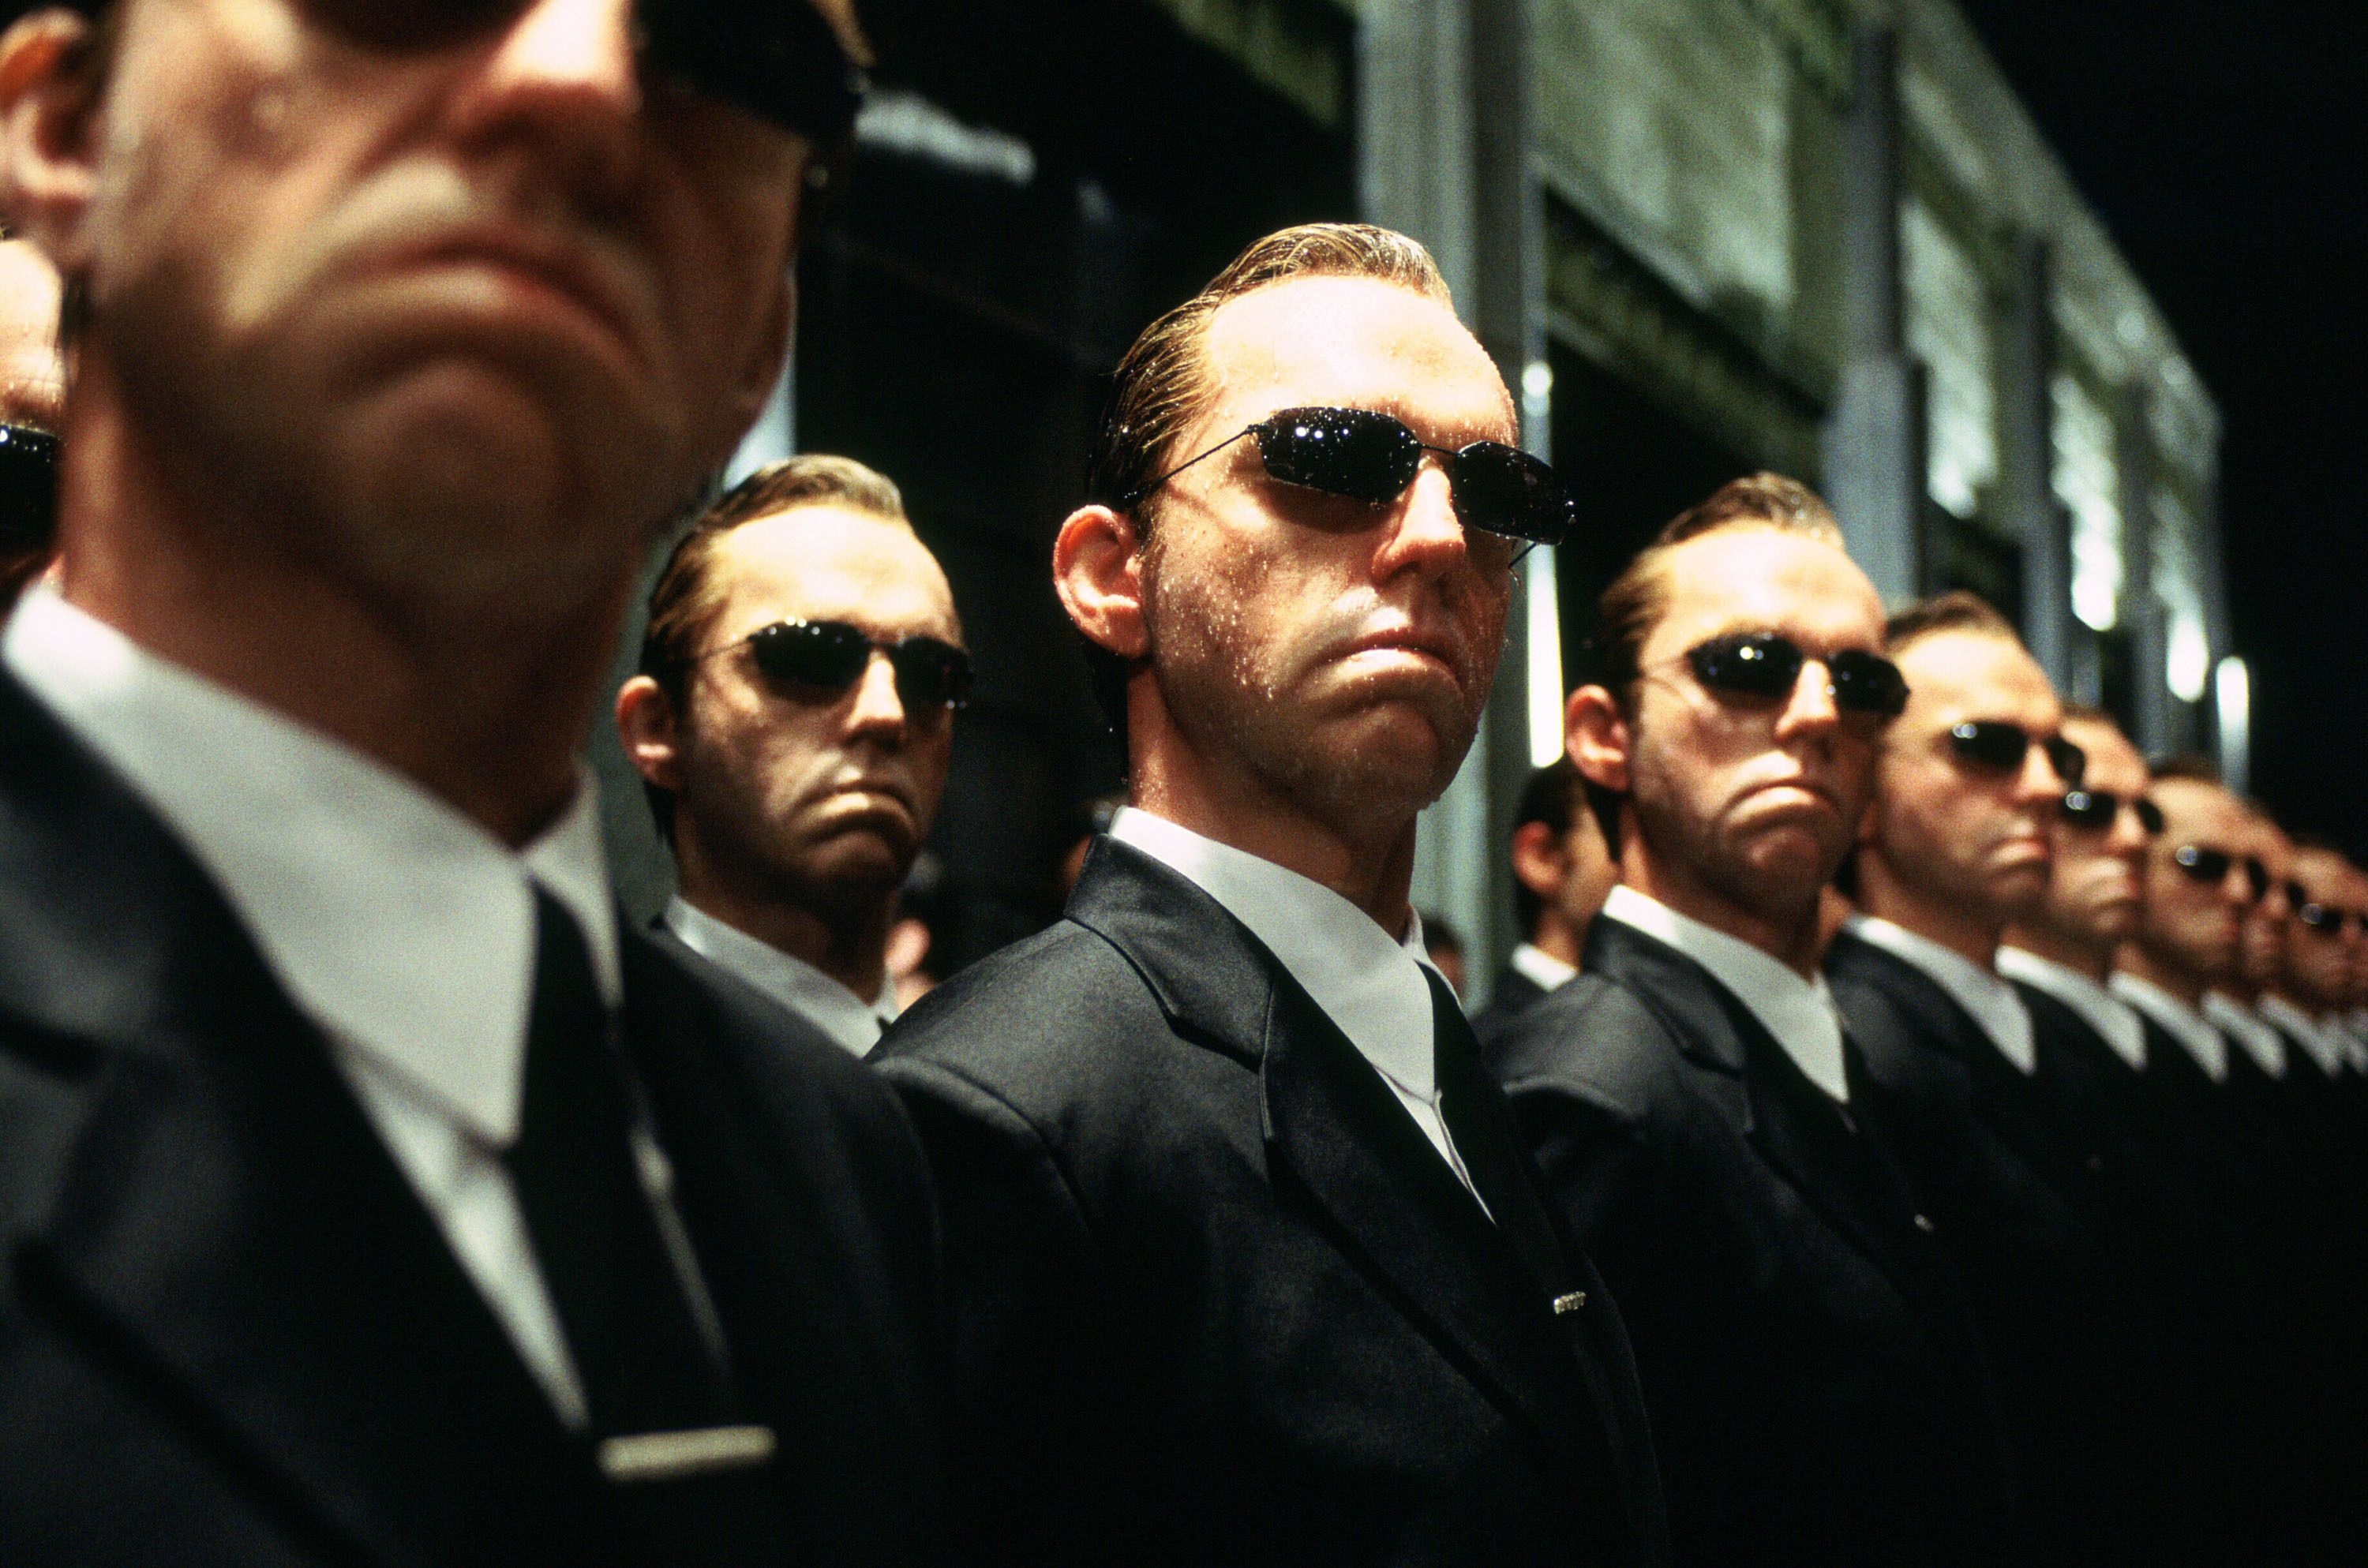 Agent Smith (The Matrix), Pin on movies, Memorable antagonist, Neo's rival, 3000x1990 HD Desktop